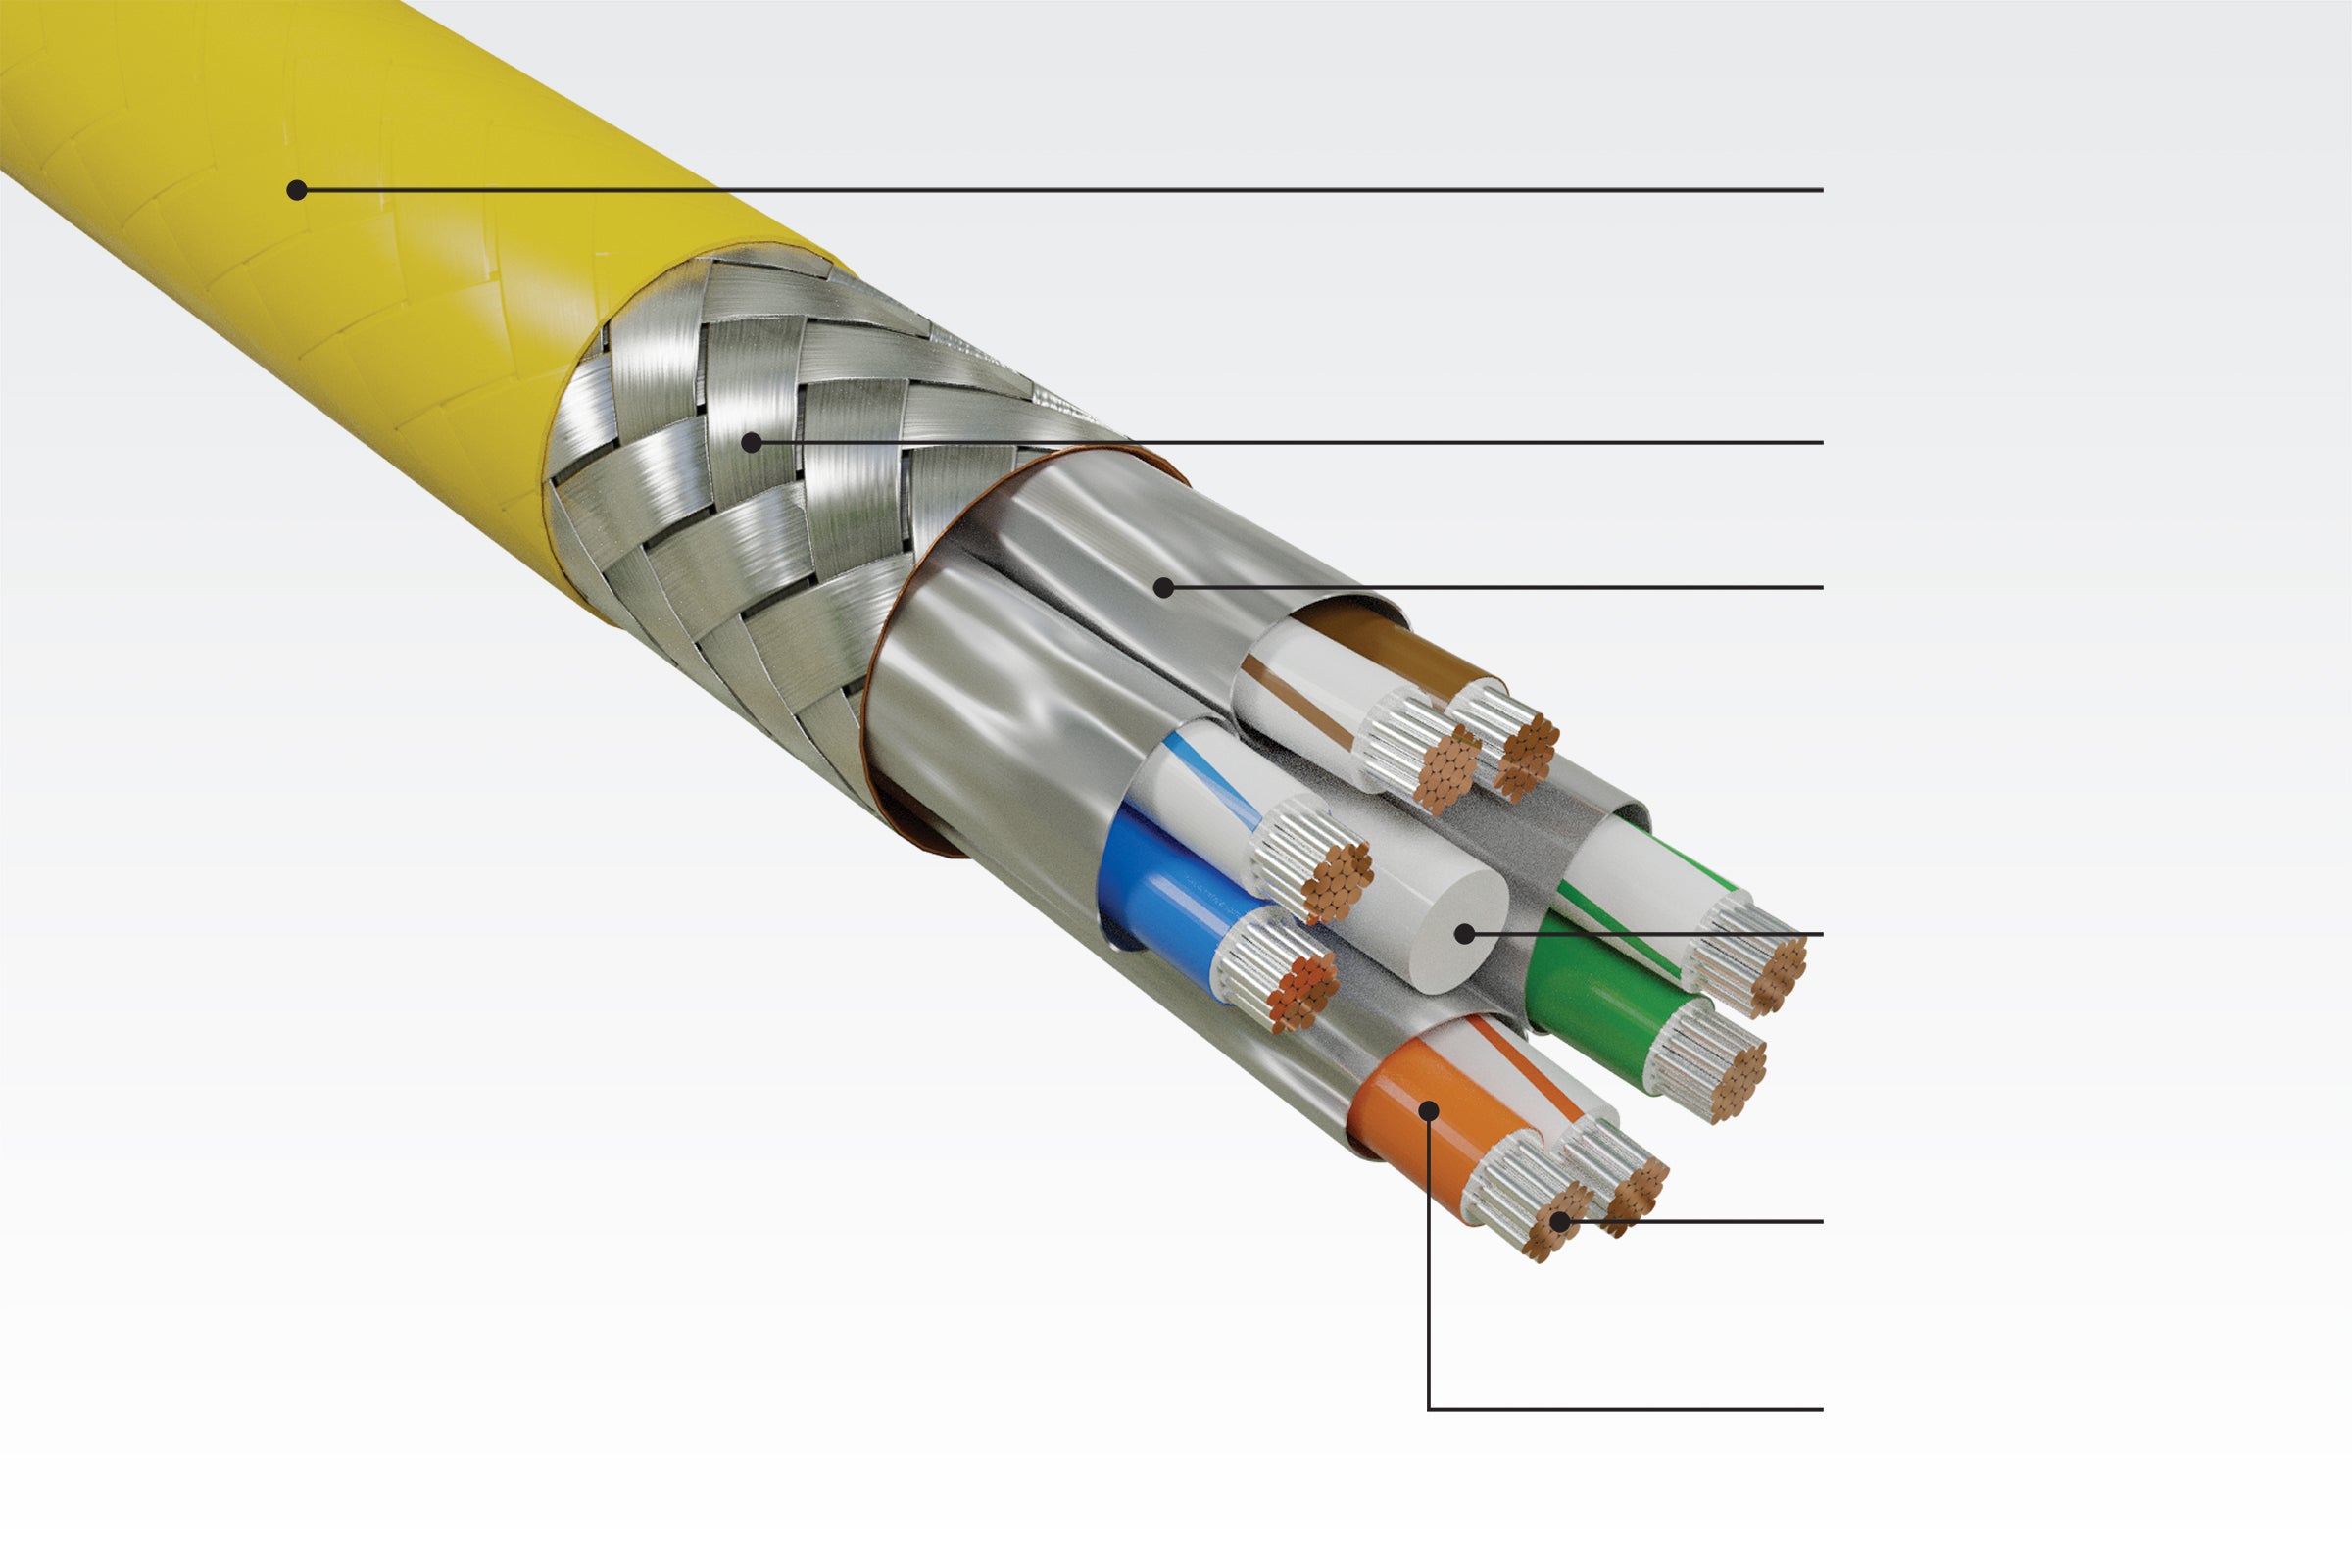 Construction of Gore’s high-density, compact Ethernet Cat6a cables